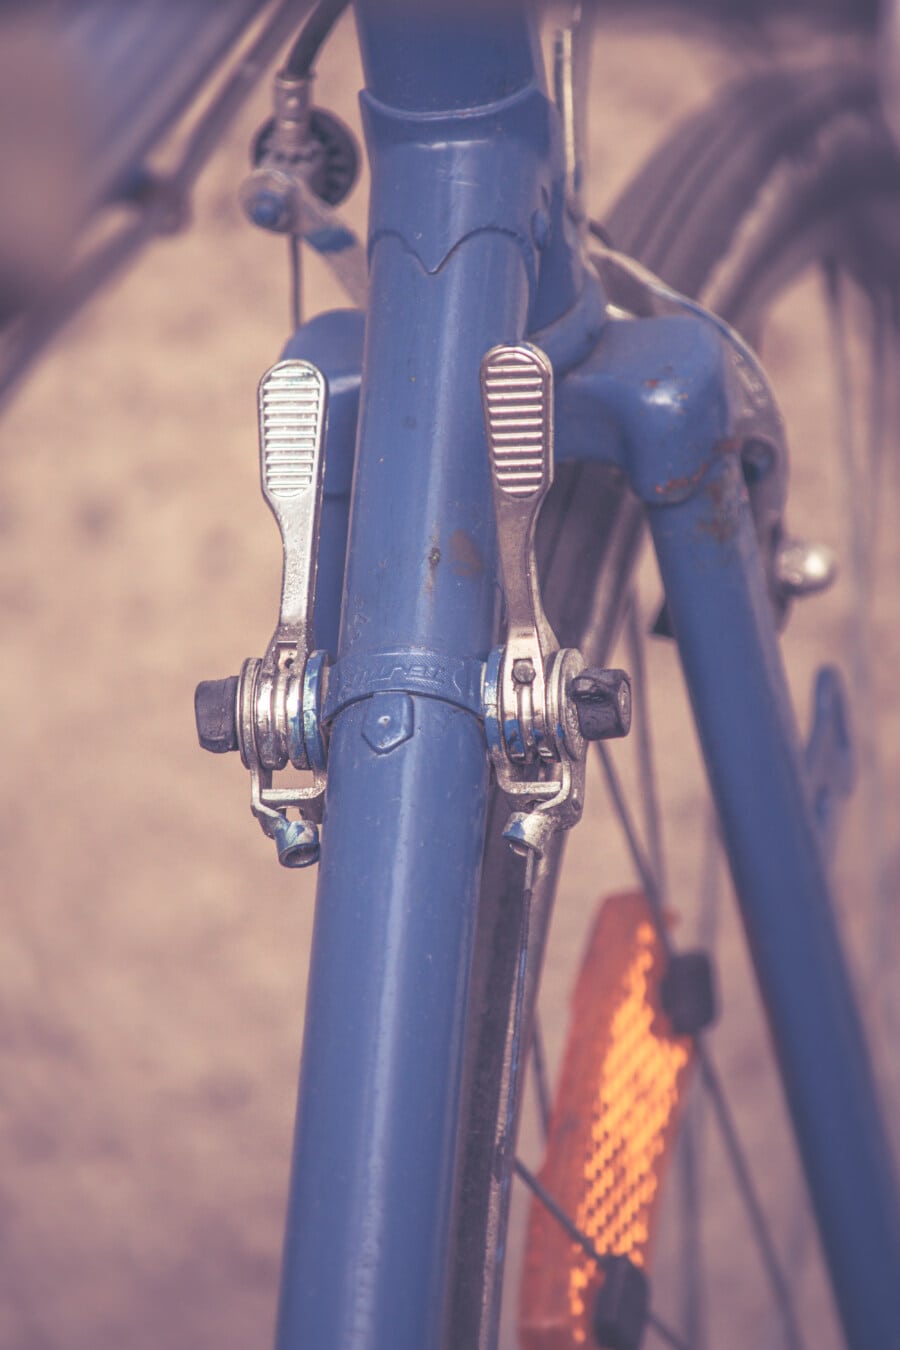 gearshift, close-up, bicycle, old style, vintage, detail, technology, steel, industry, vehicle